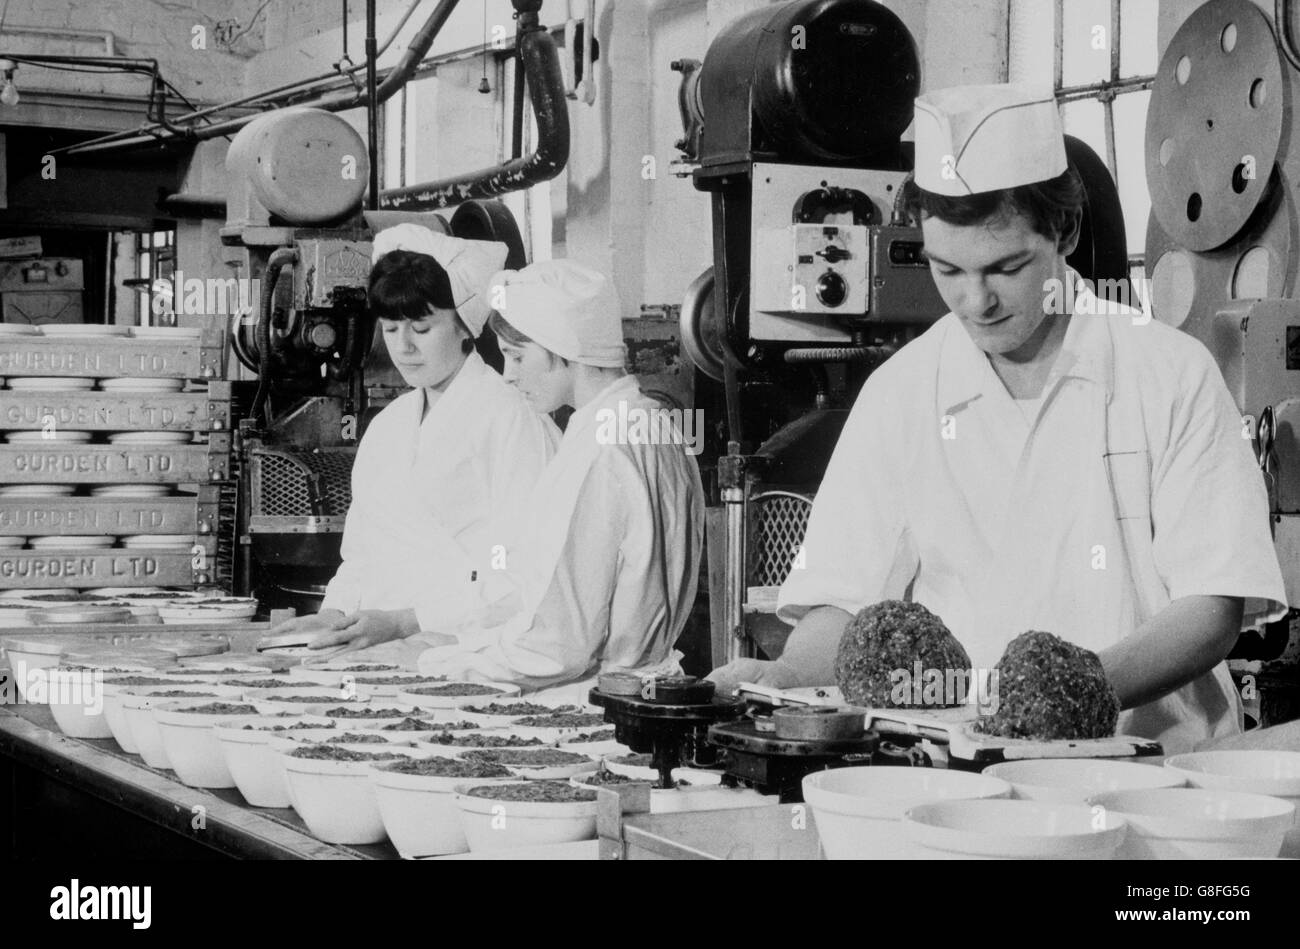 The production line of Christmas puddings at the Oxford cake manufacturers of Oliver & Gurden, where 6,132 Christmas puddings started a journey to delight the French when they left Oxford for Paris in 961 wood-wool packed containers. Stock Photo